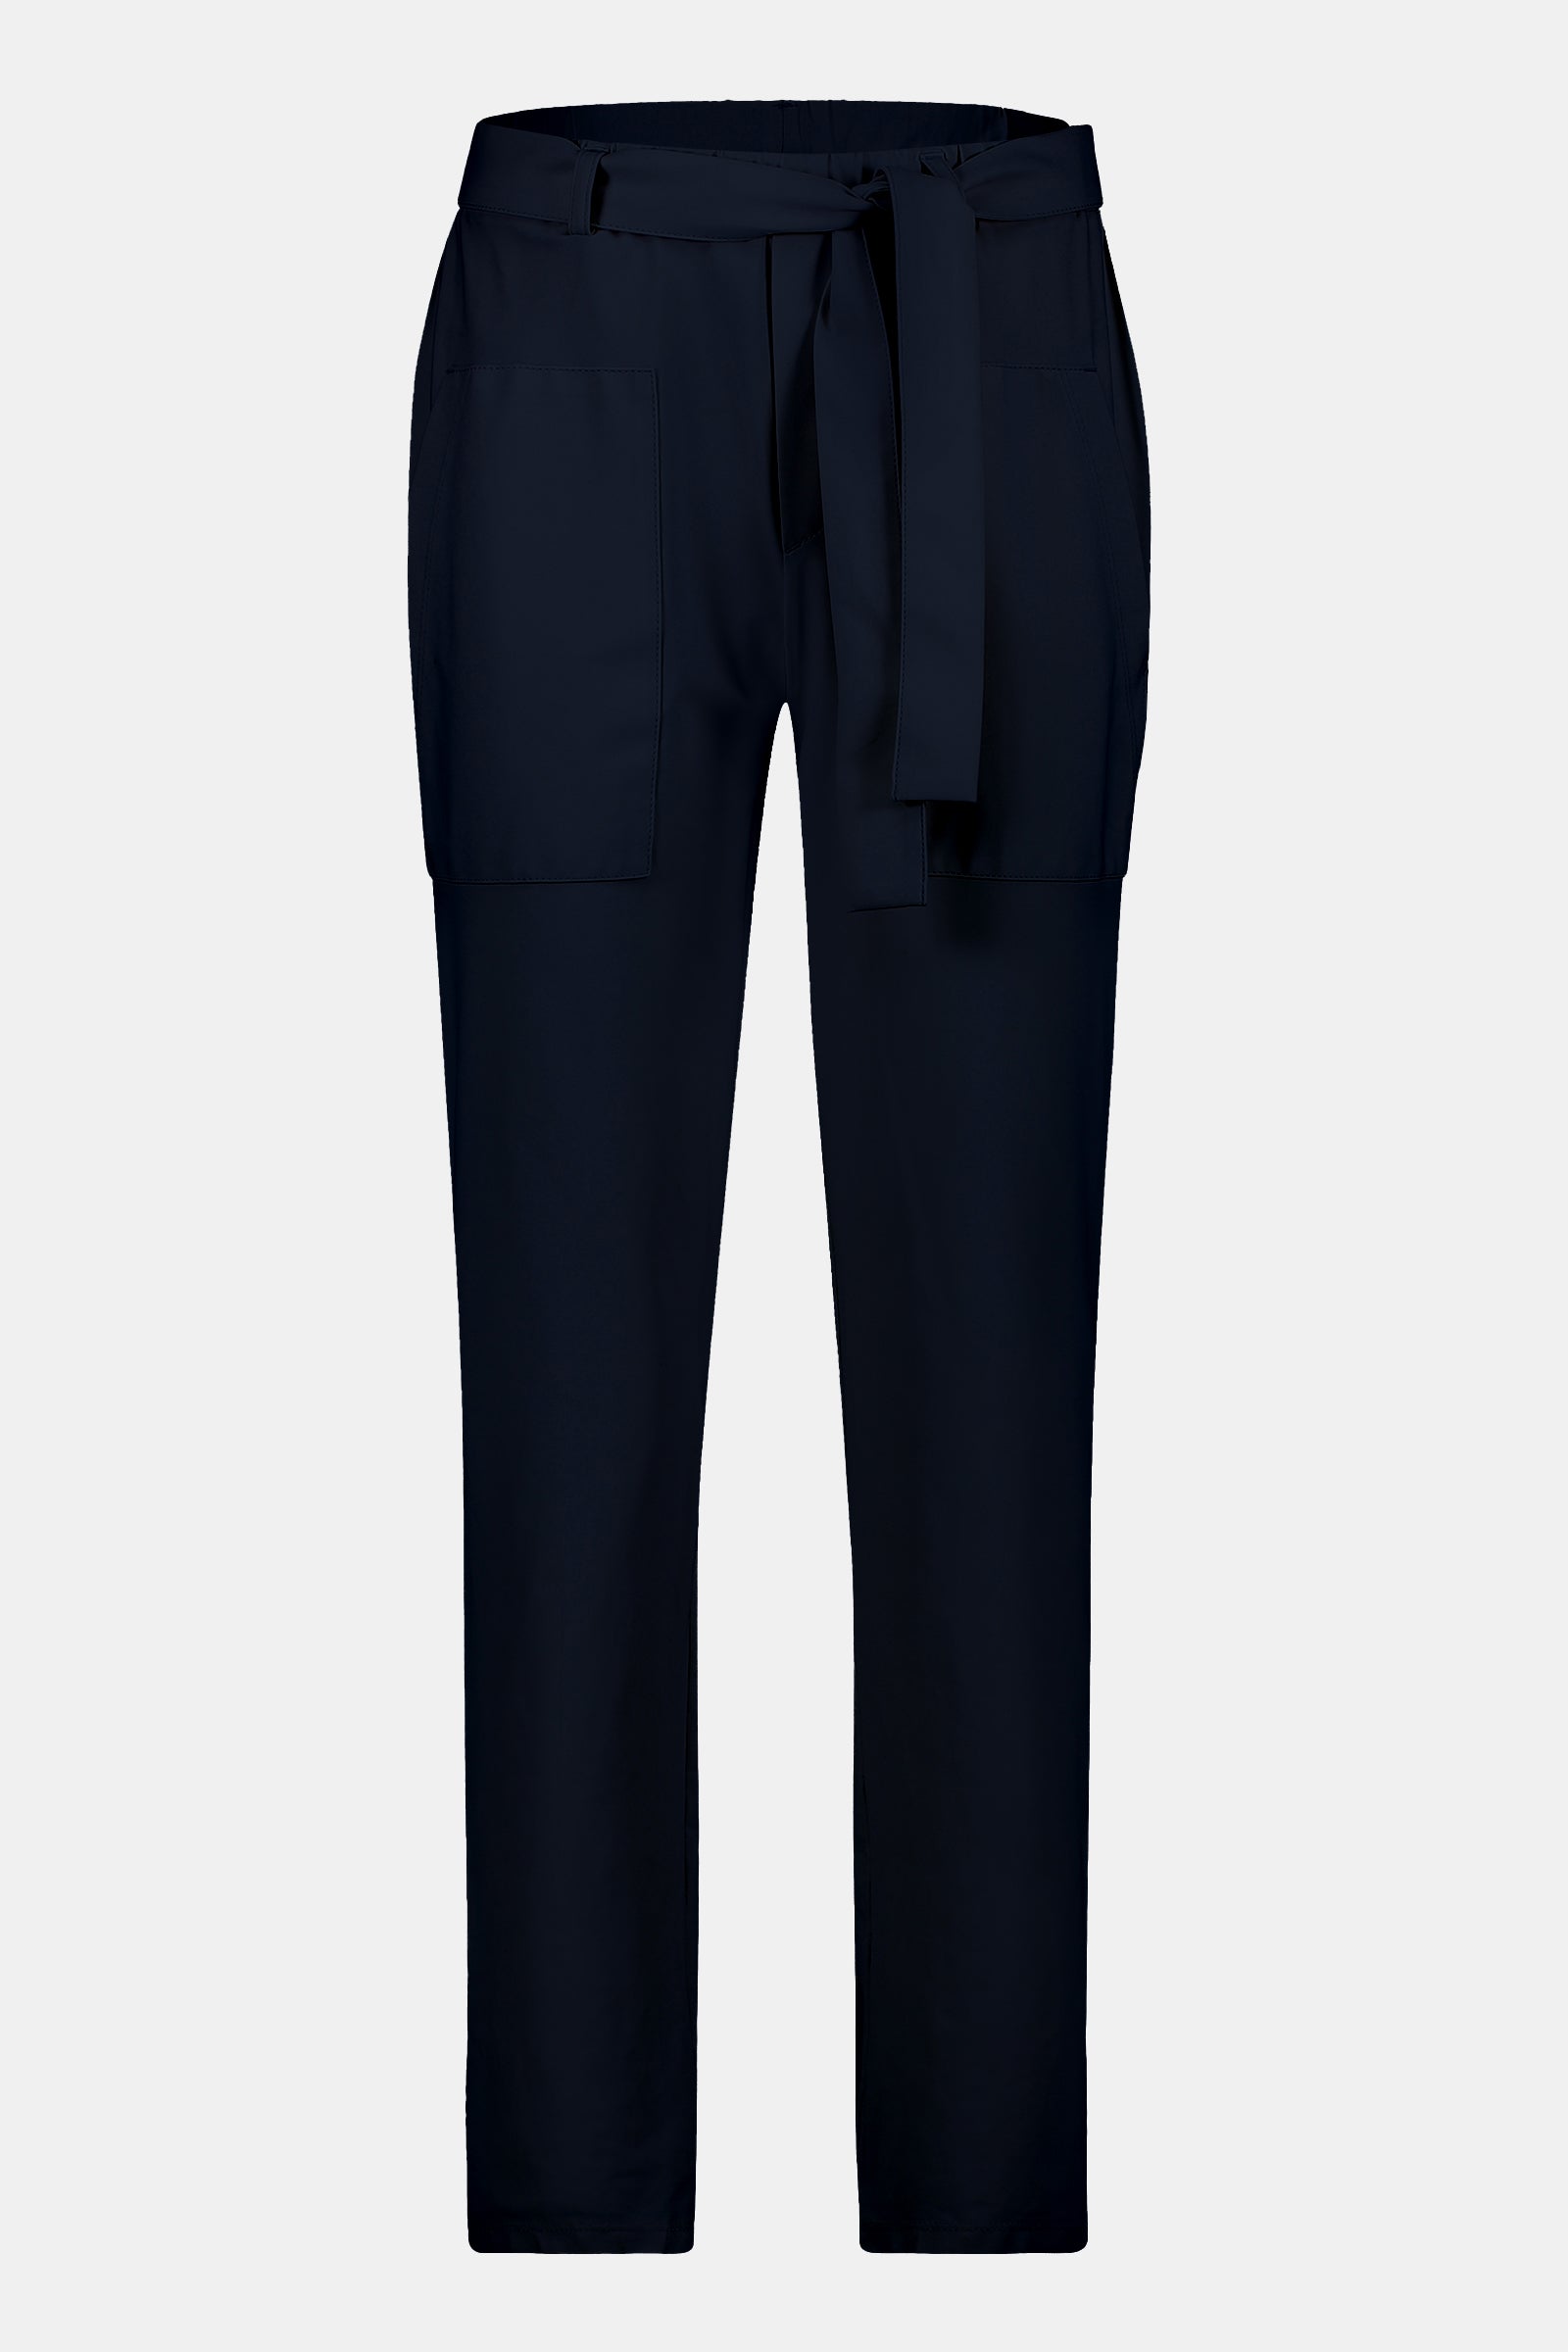 TROUSERS (RALEIGH) NAVY